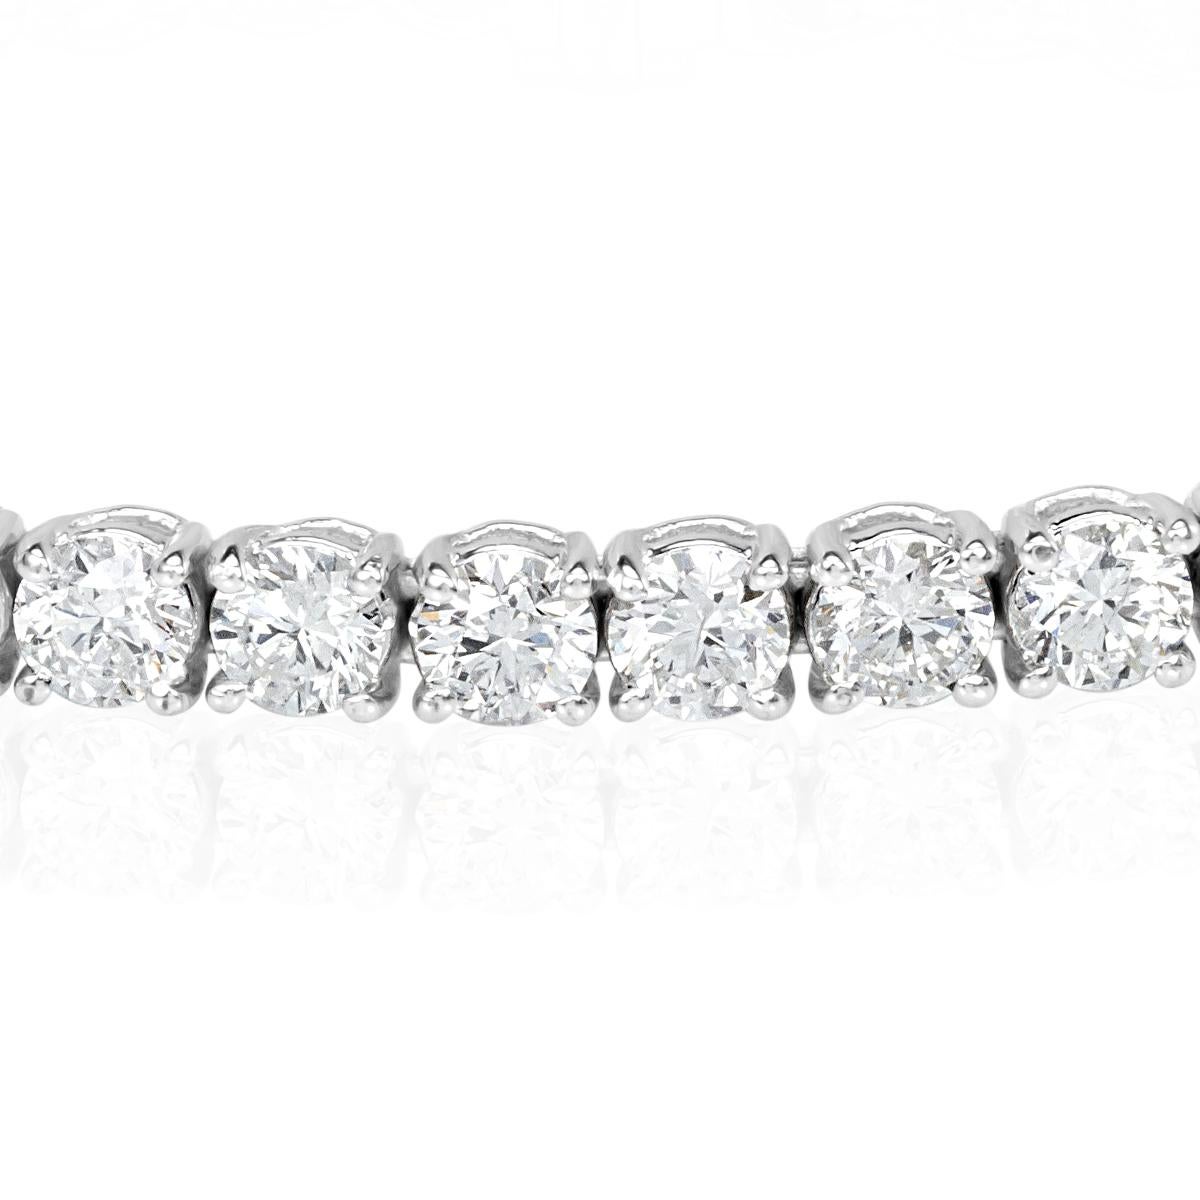 This gorgeous diamond tennis bracelet showcases 9.98ct of impeccably matched round brilliant cut diamonds graded at F-G in color, SI1-SI2 in clarity. They are set in a classic handmade, 18k white gold setting that appears to float on the wrist.
